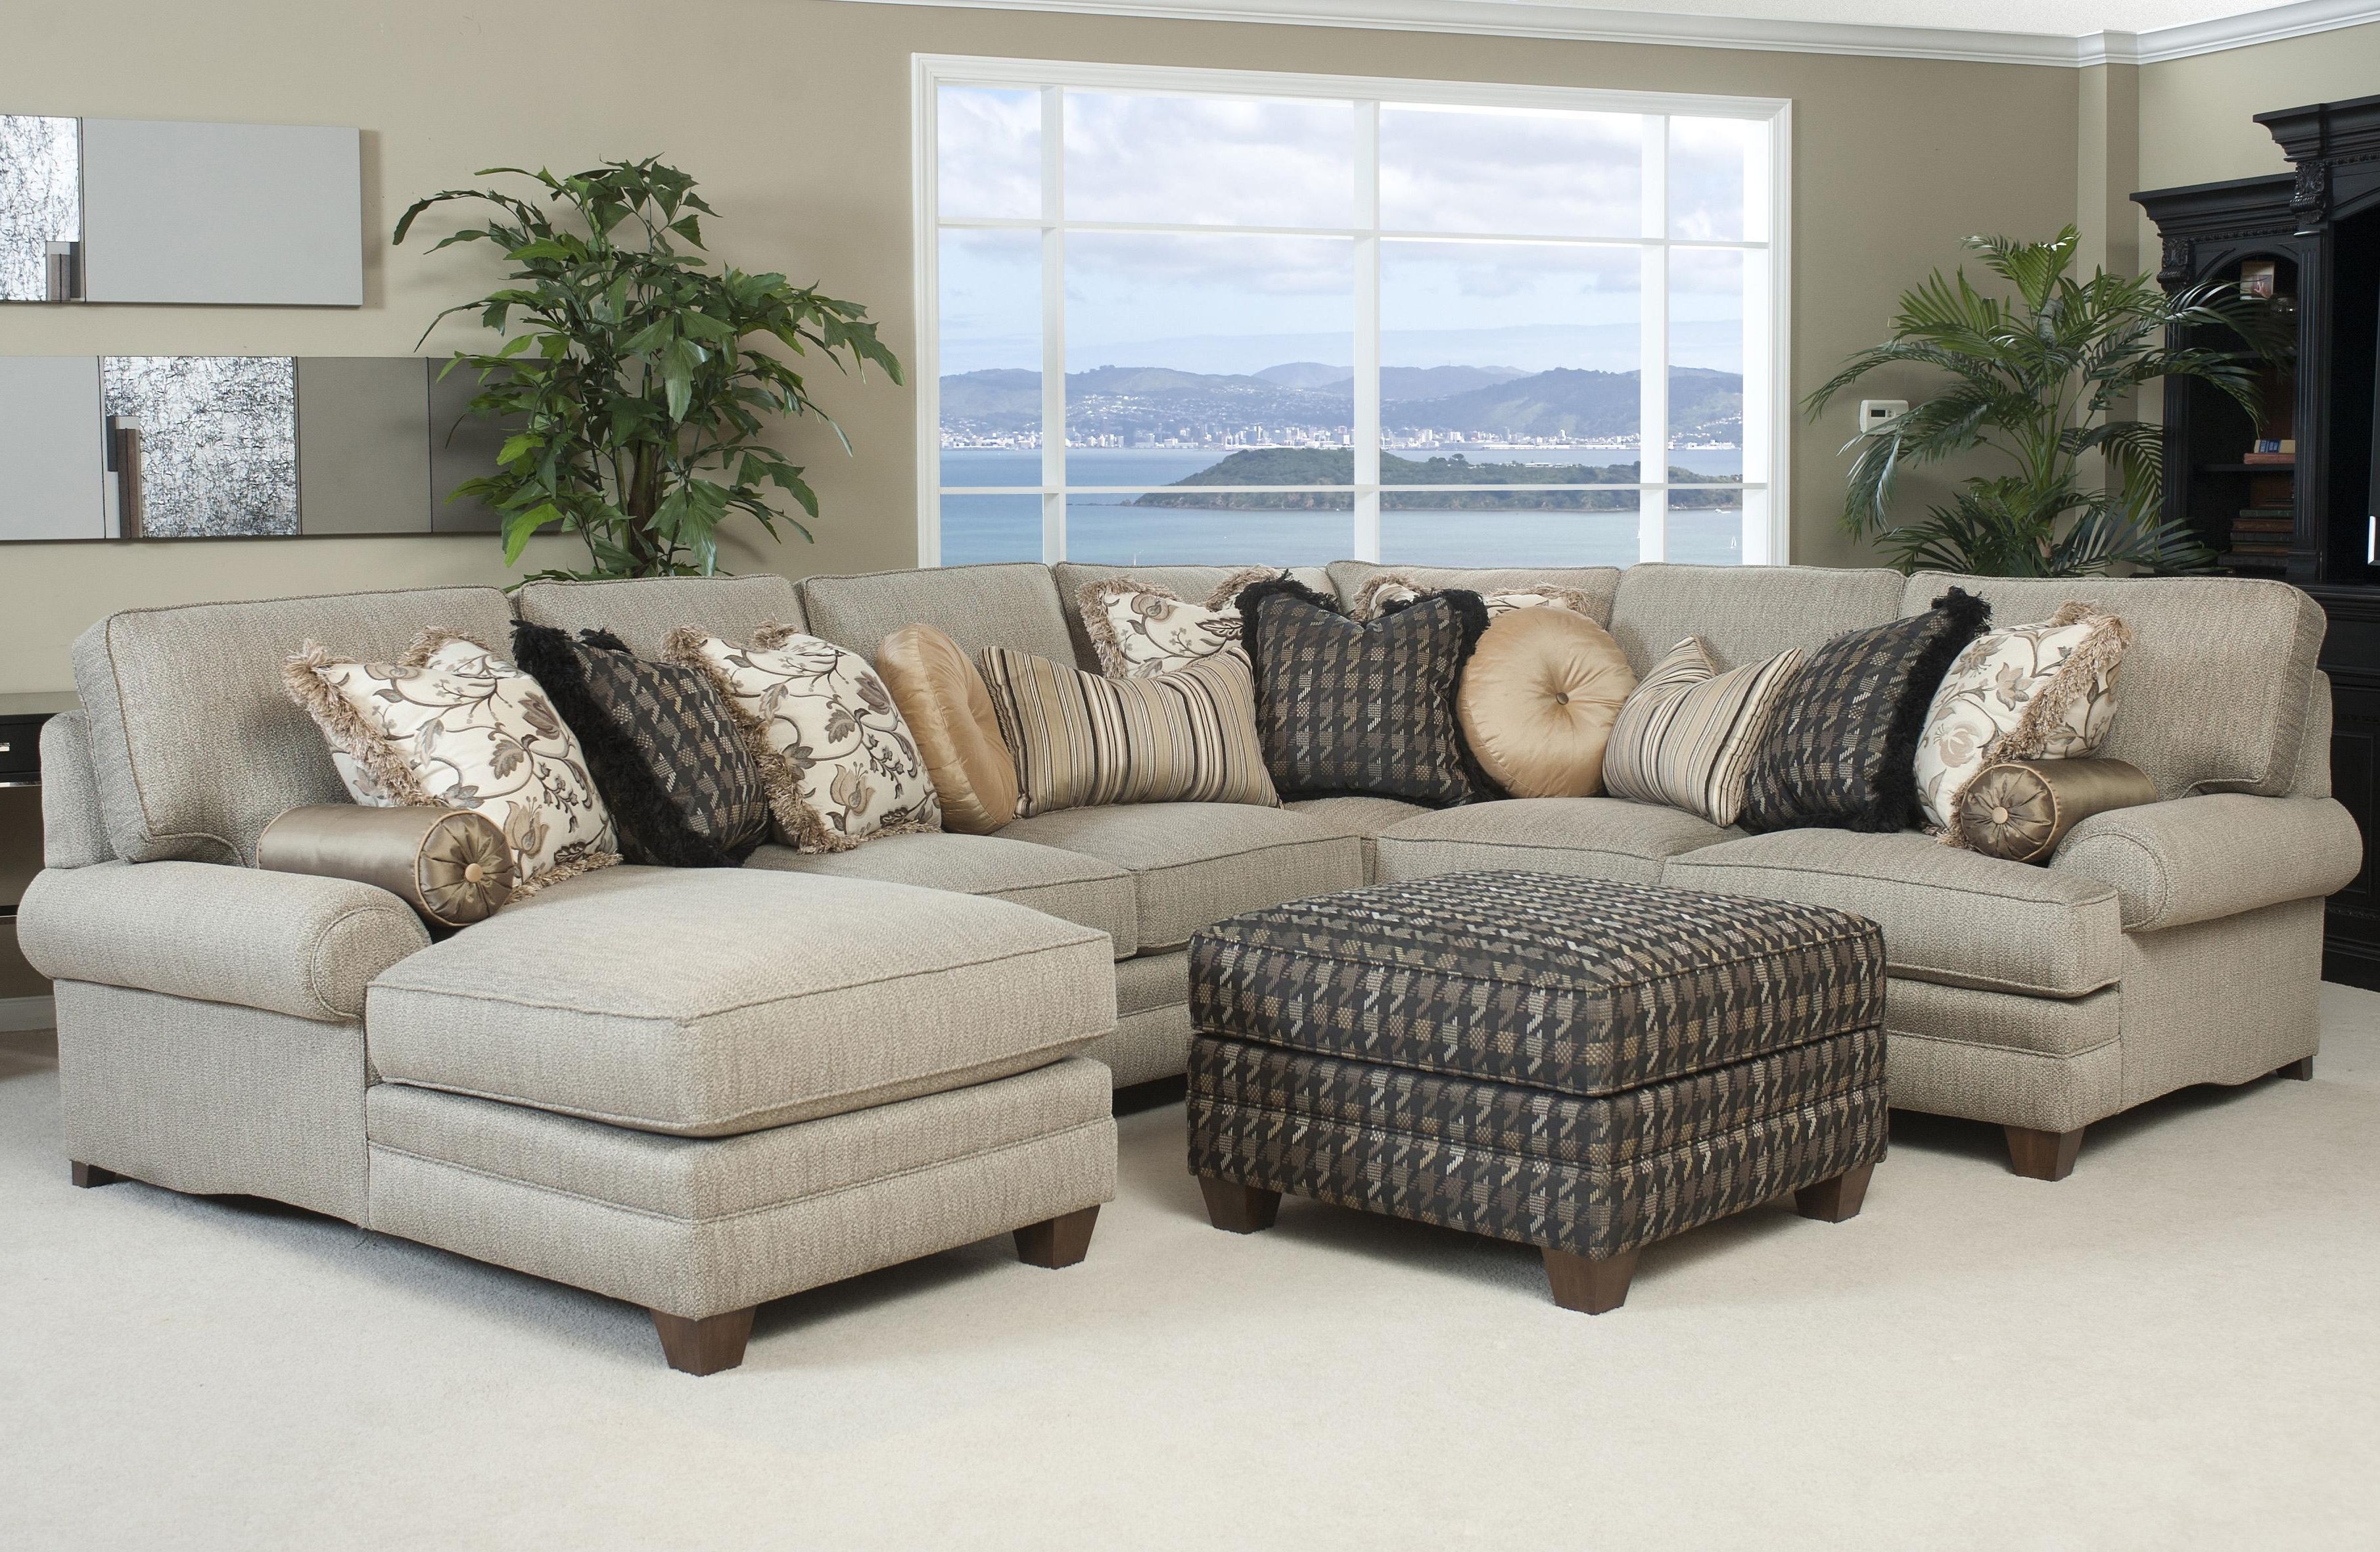 Recent Best Traditional Sectional Sofas With Chaise Contemporary Regarding Sectional Couches With Chaise (View 13 of 15)